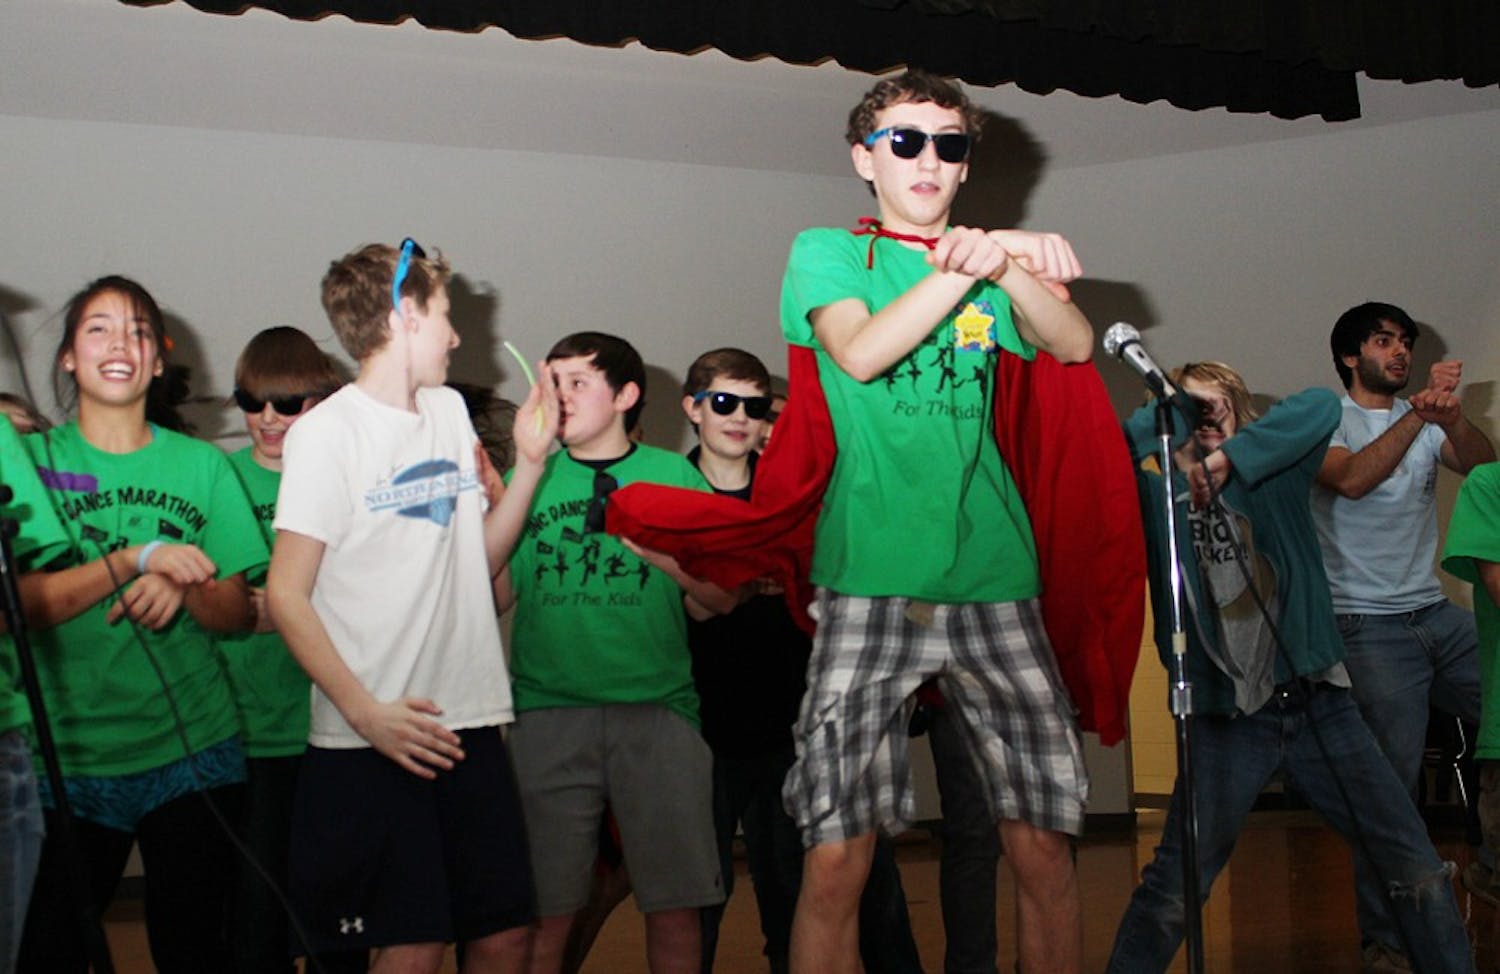 Dance Marathon hosted a Mini Dance Marathon at McDougal Middle School in Carrboro on Friday night. Austin Mejia, 14, (sunglasses and cape) leads dancers to the song Gangnam Style by Psi.